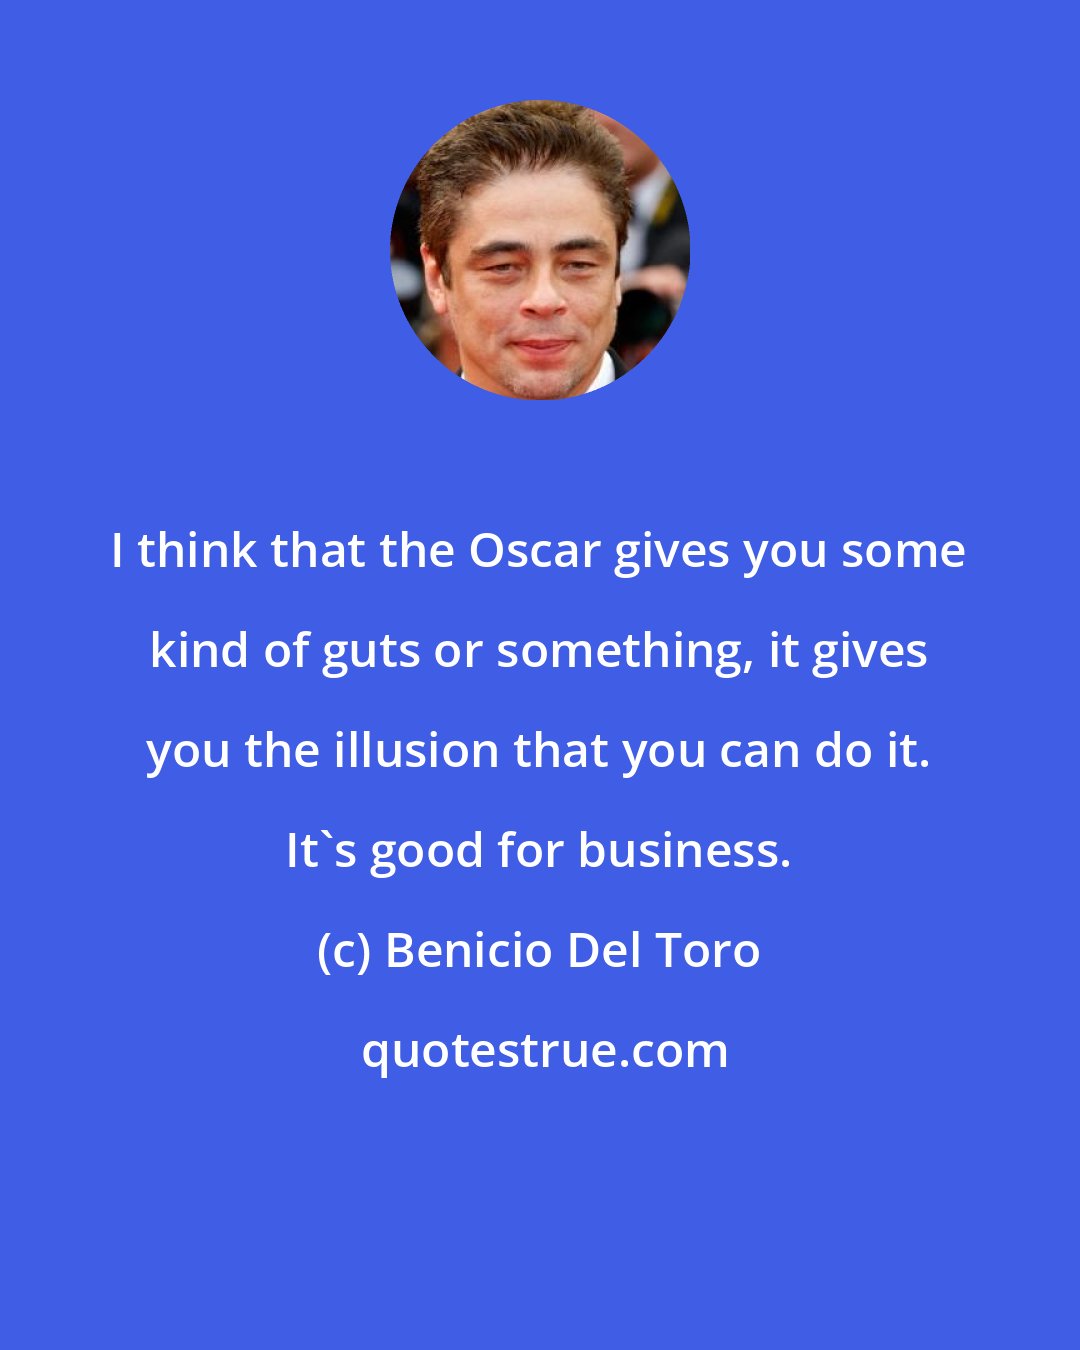 Benicio Del Toro: I think that the Oscar gives you some kind of guts or something, it gives you the illusion that you can do it. It's good for business.